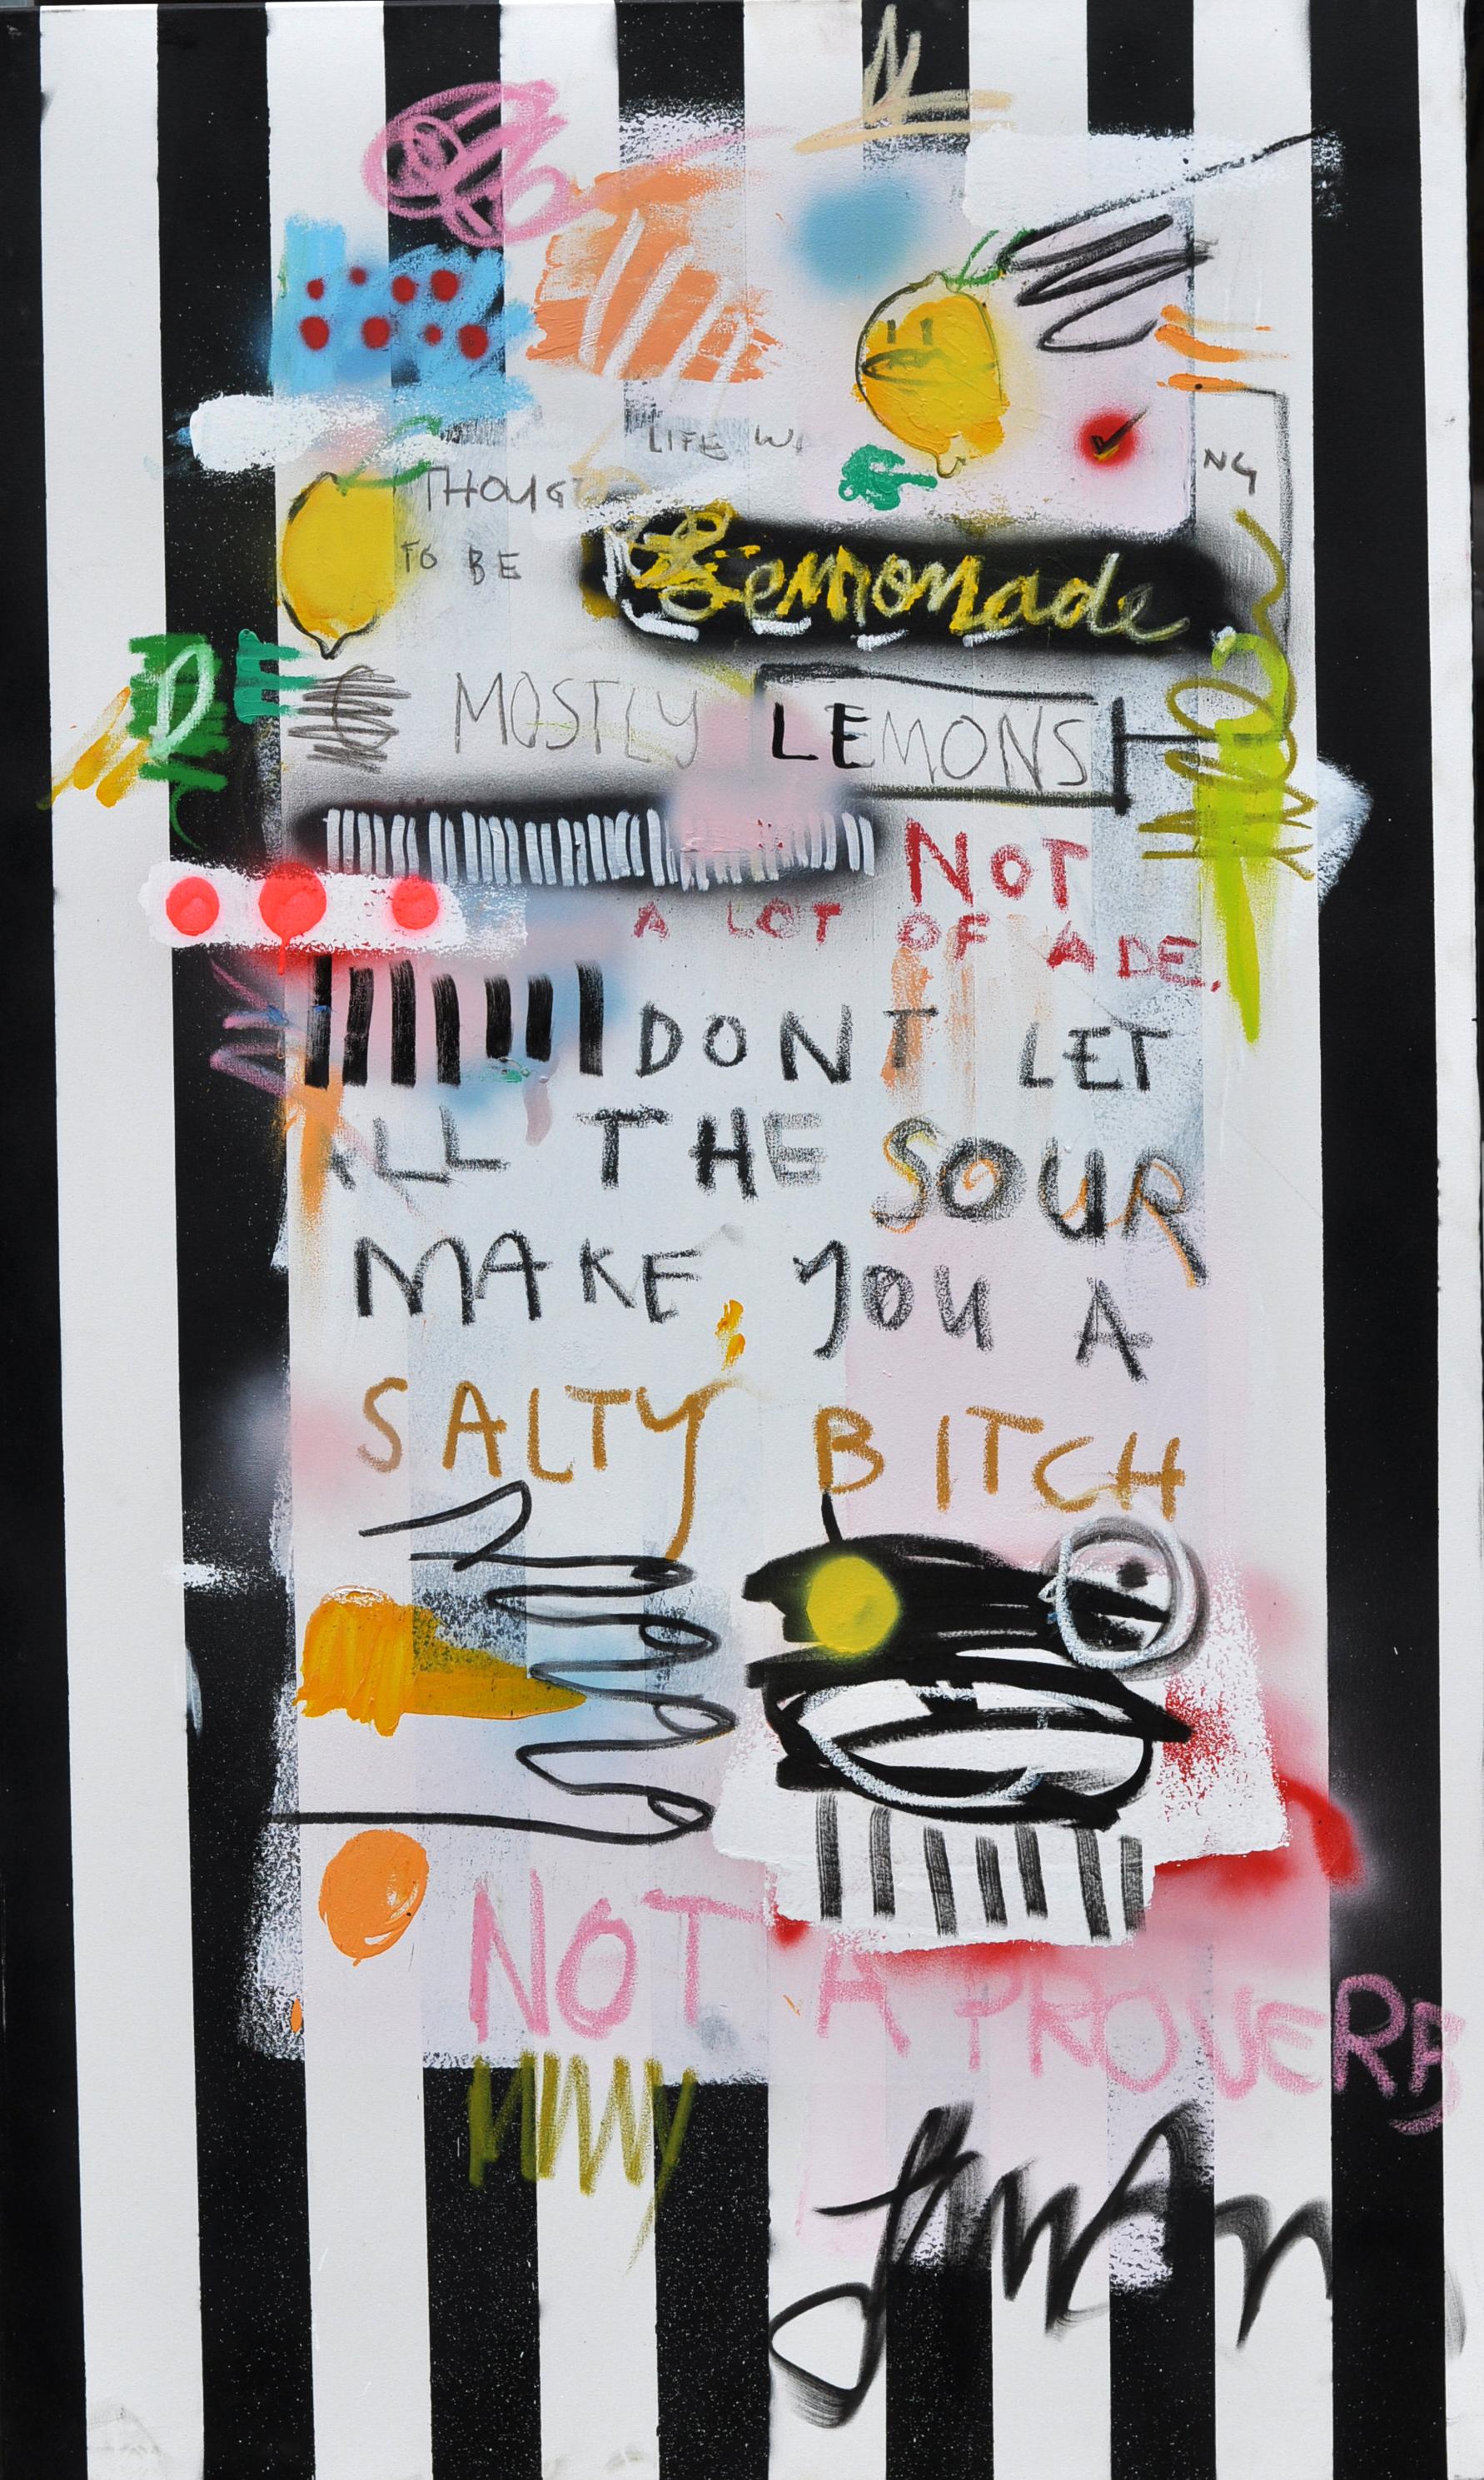 “Mostly Lemons" by Memphis-based artist Frances Berry employs spray paint, oil crayon, and paint pens to illustrate an irreverent yet sage piece of advice. A colorful splash of icons and text, “Mostly Lemons” embodies the playful contradictions